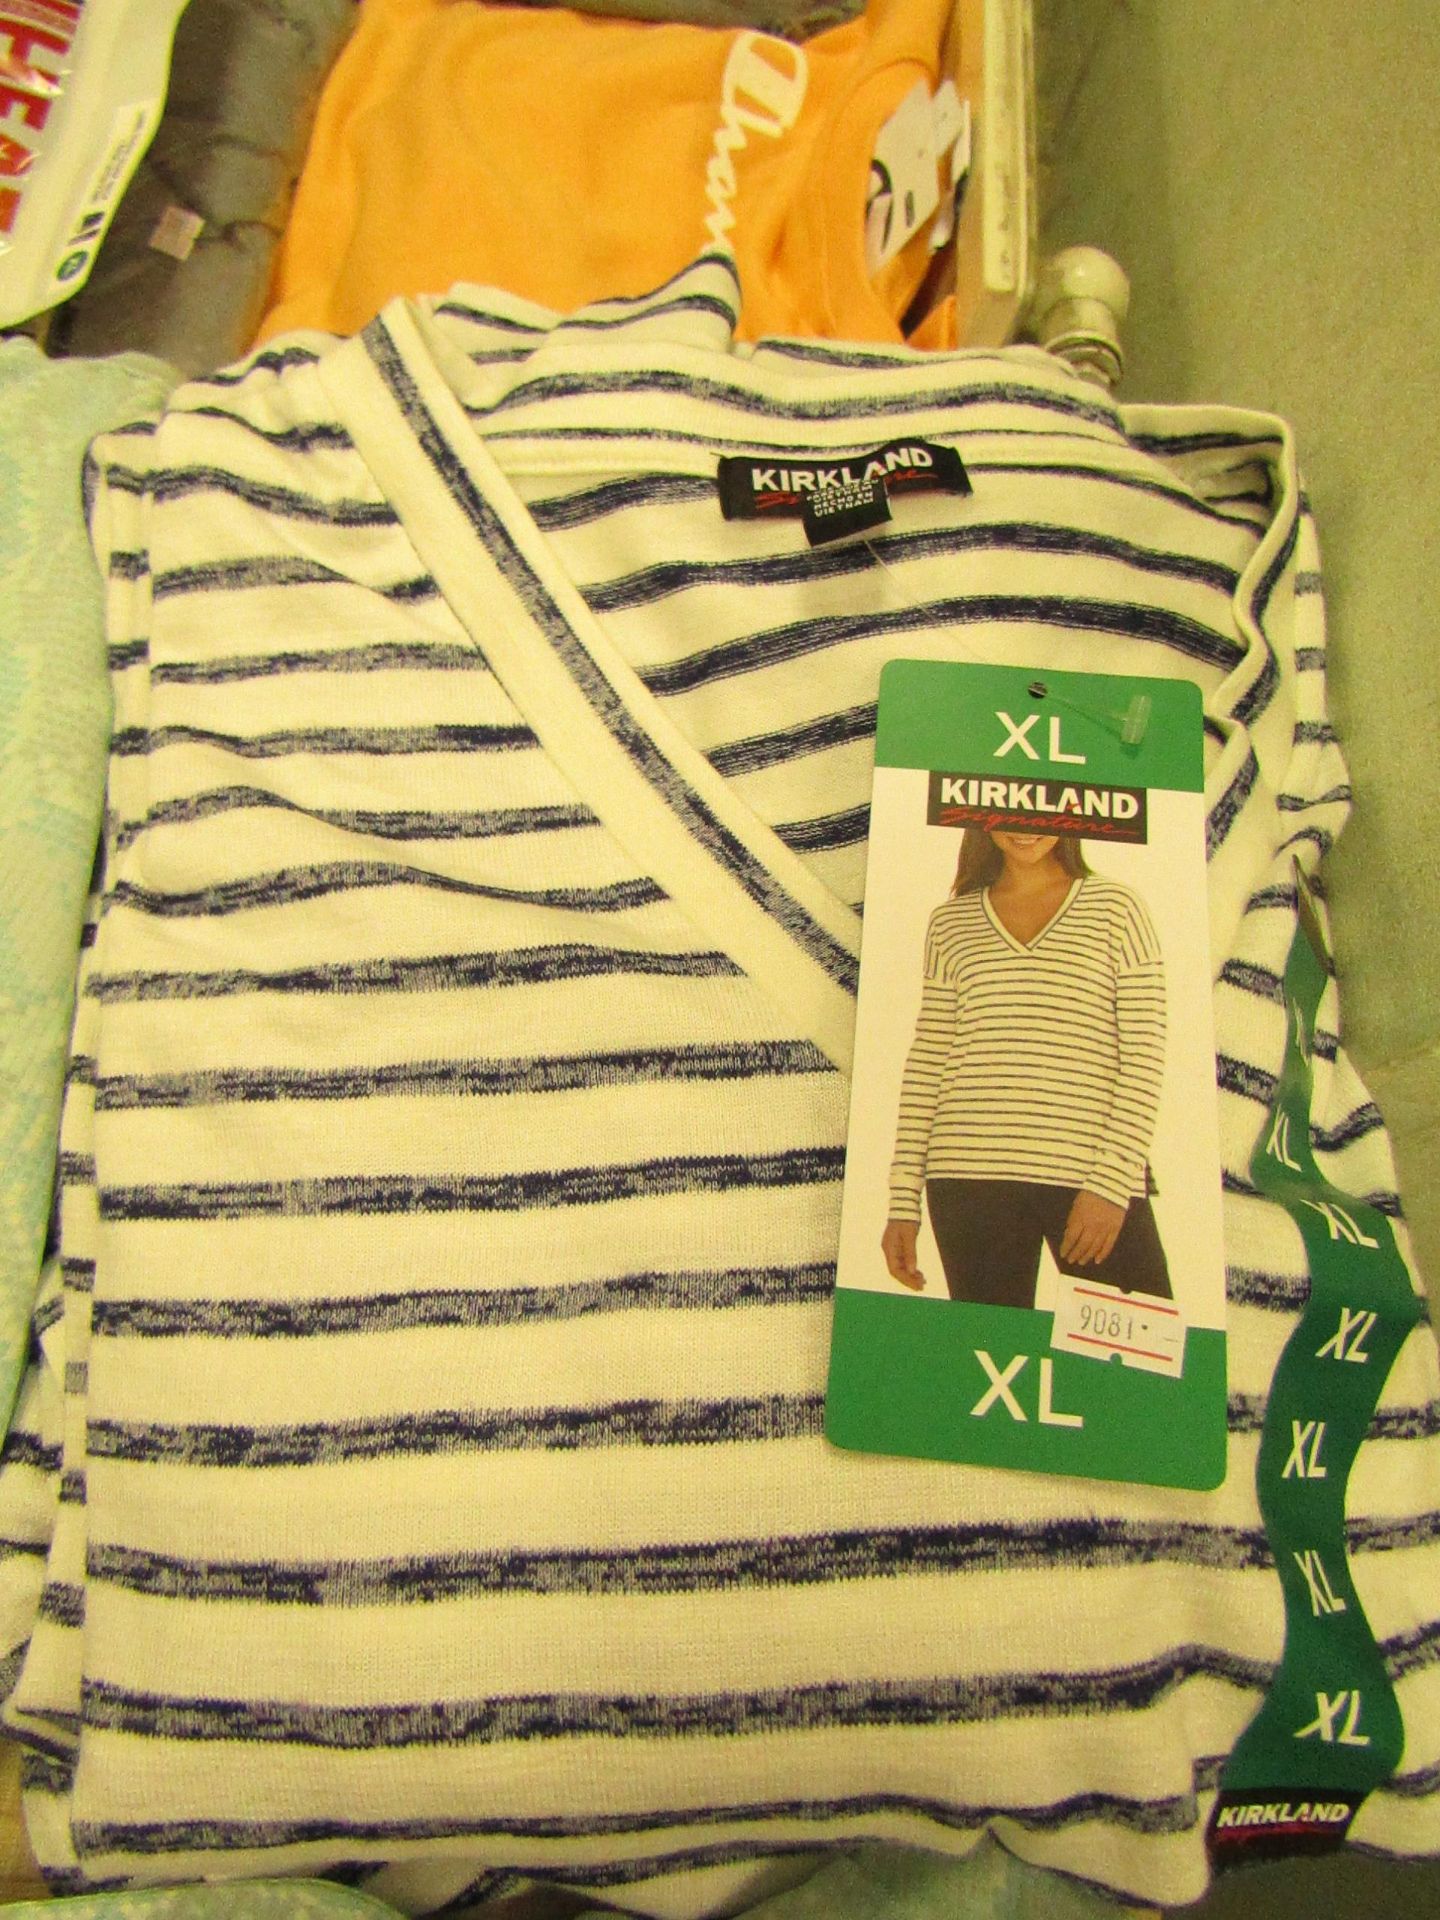 Kirkland Xl Ladies Long Sleeve shirt white with navy lines new with tags & unpackaged